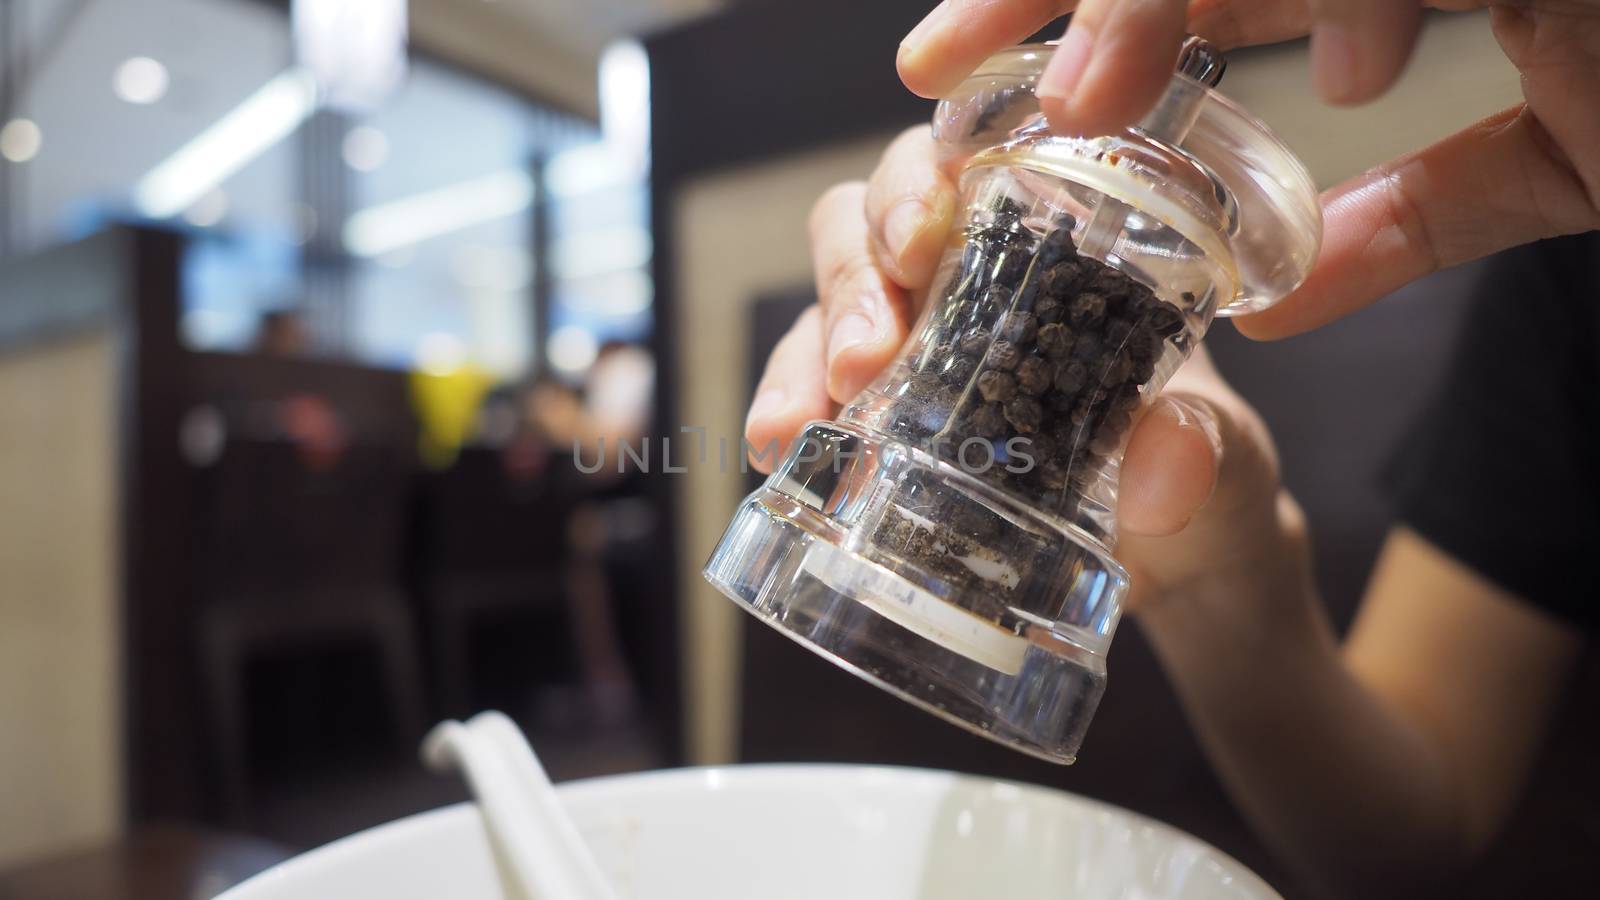 Clear color glass and Thailand black pepper mill or grinder in hands that twisting the bottle and pouring or adding small pieces of spices to plate or bowl for a better taste in the meal.